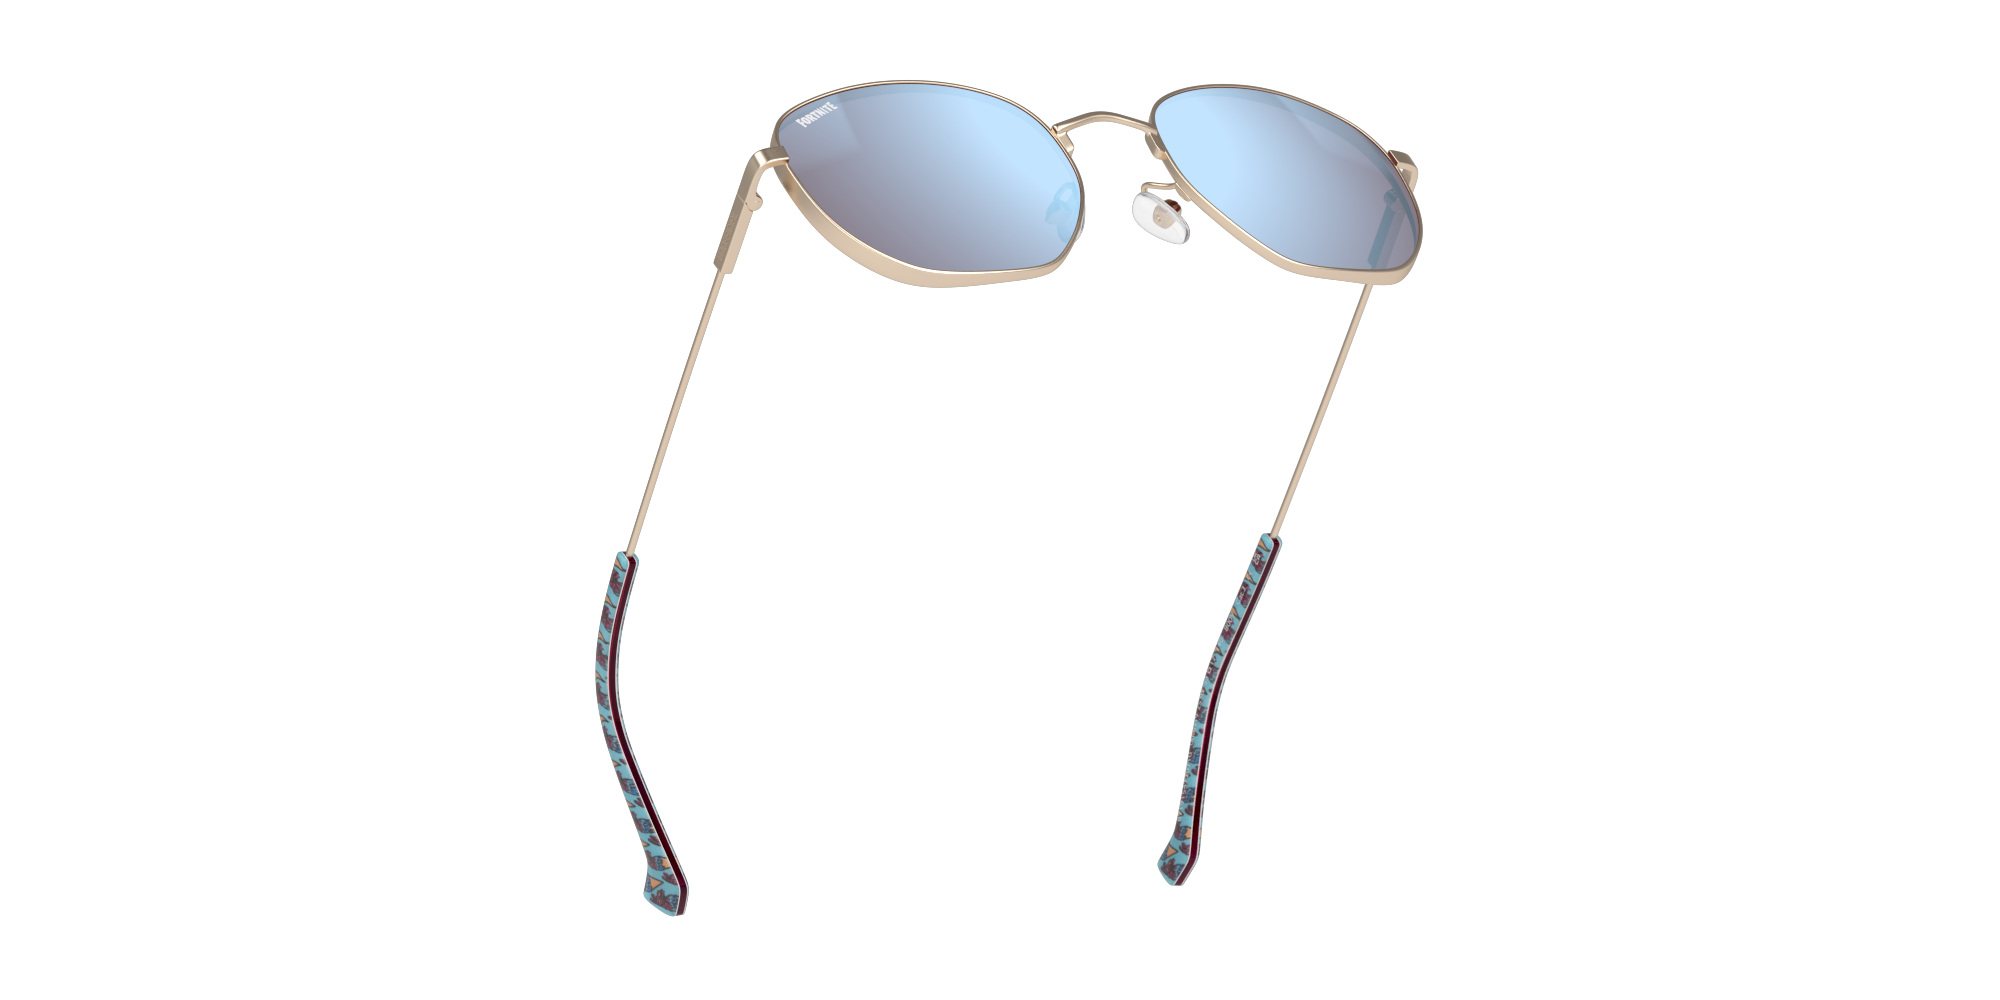 Bottom_Up Fortnite with Unofficial UNSU0155 Sunglasses Grey / Gold